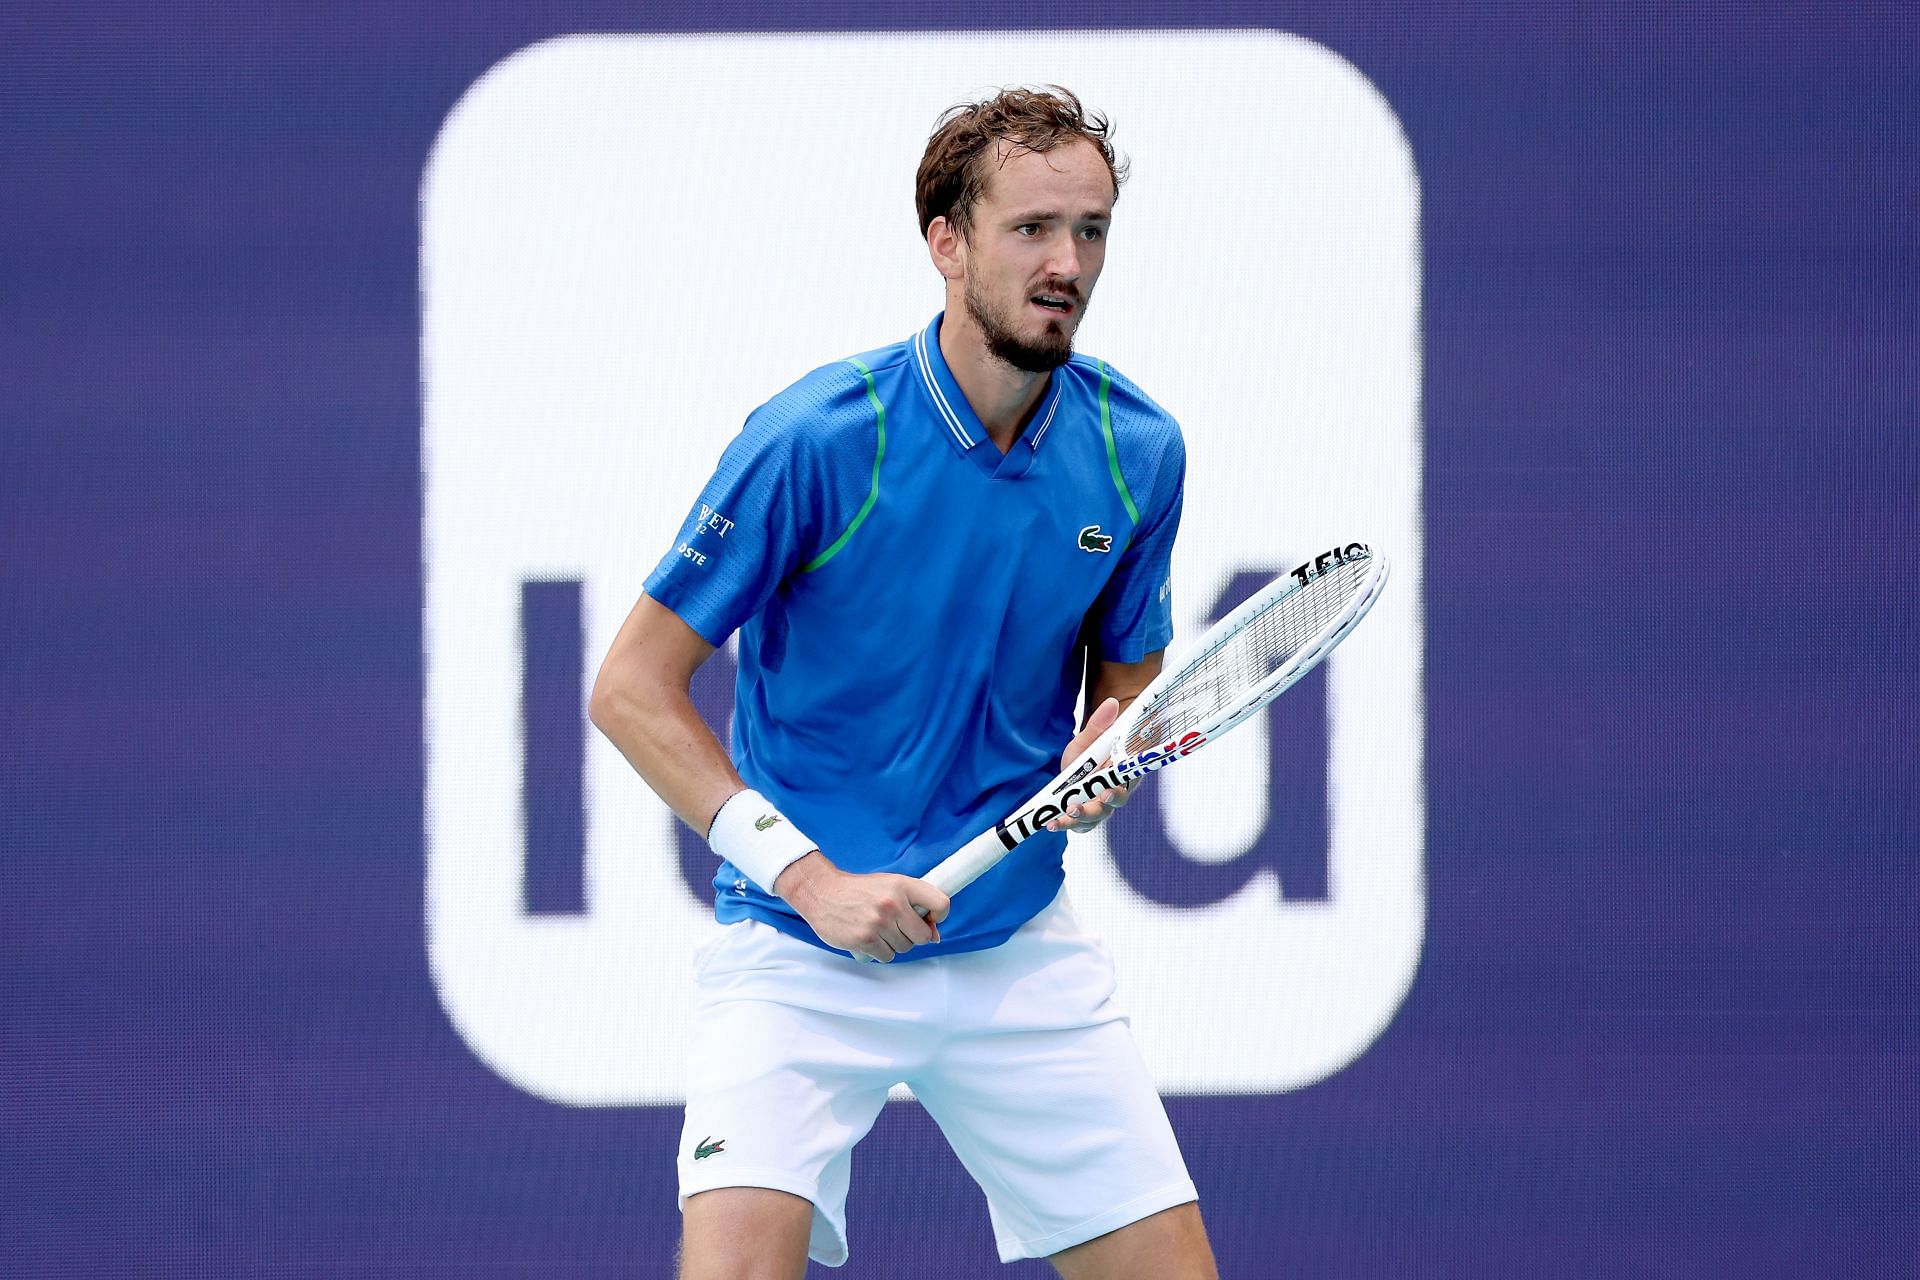 Miami Open 2023 final, Daniil Medvedev vs Jannik Sinner Where to watch, TV schedule, live streaming details, and more